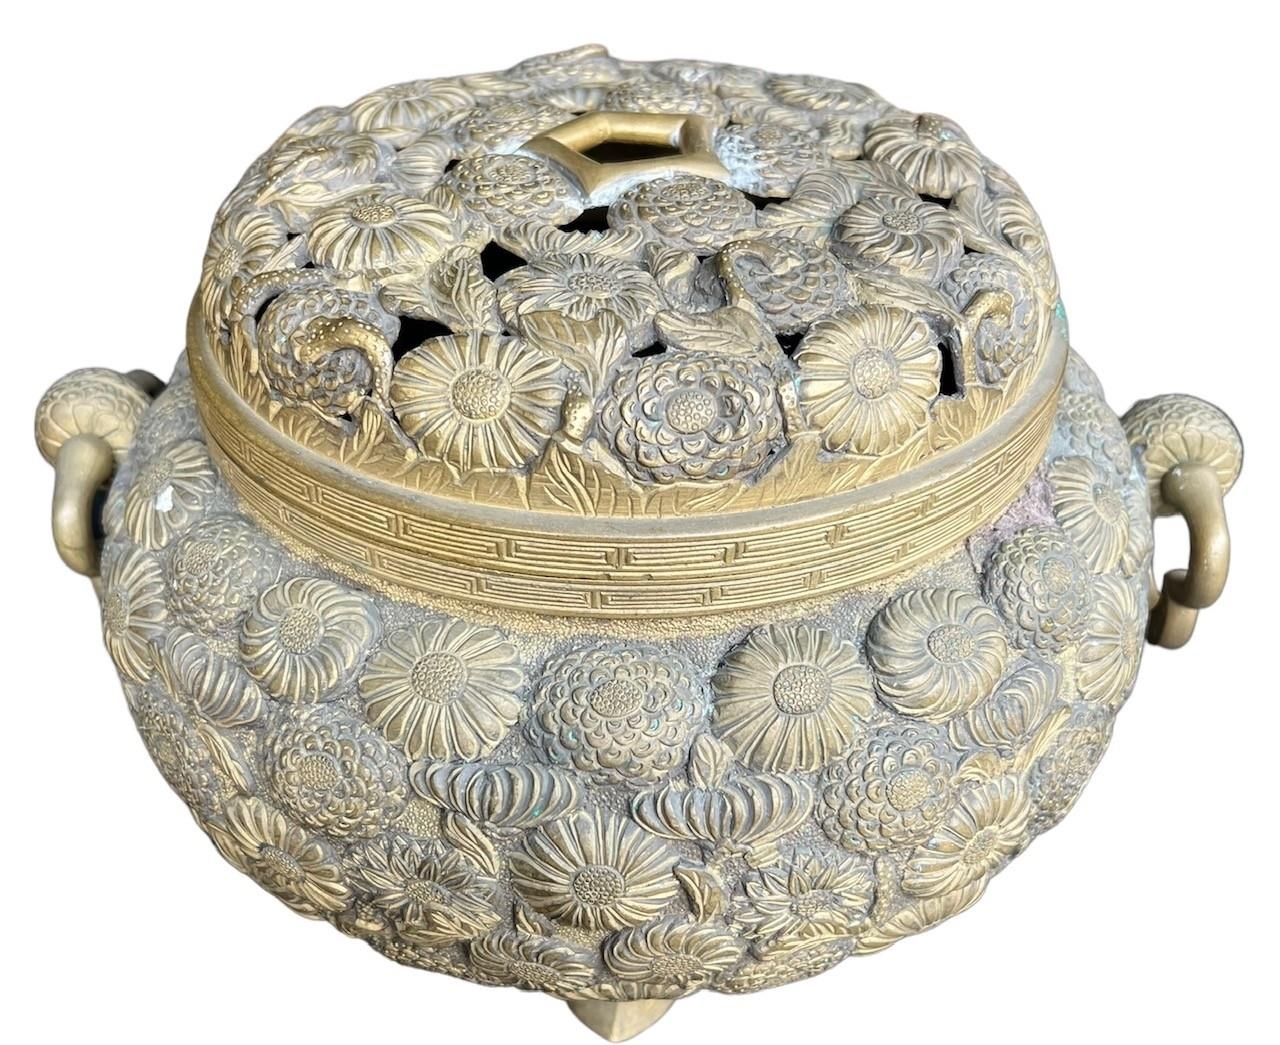 A LARGE JAPANESE MEIJI PERIOD BRONZE KORO AND COVER Decorated with sixteenth petal chrysanthemum - Image 5 of 8